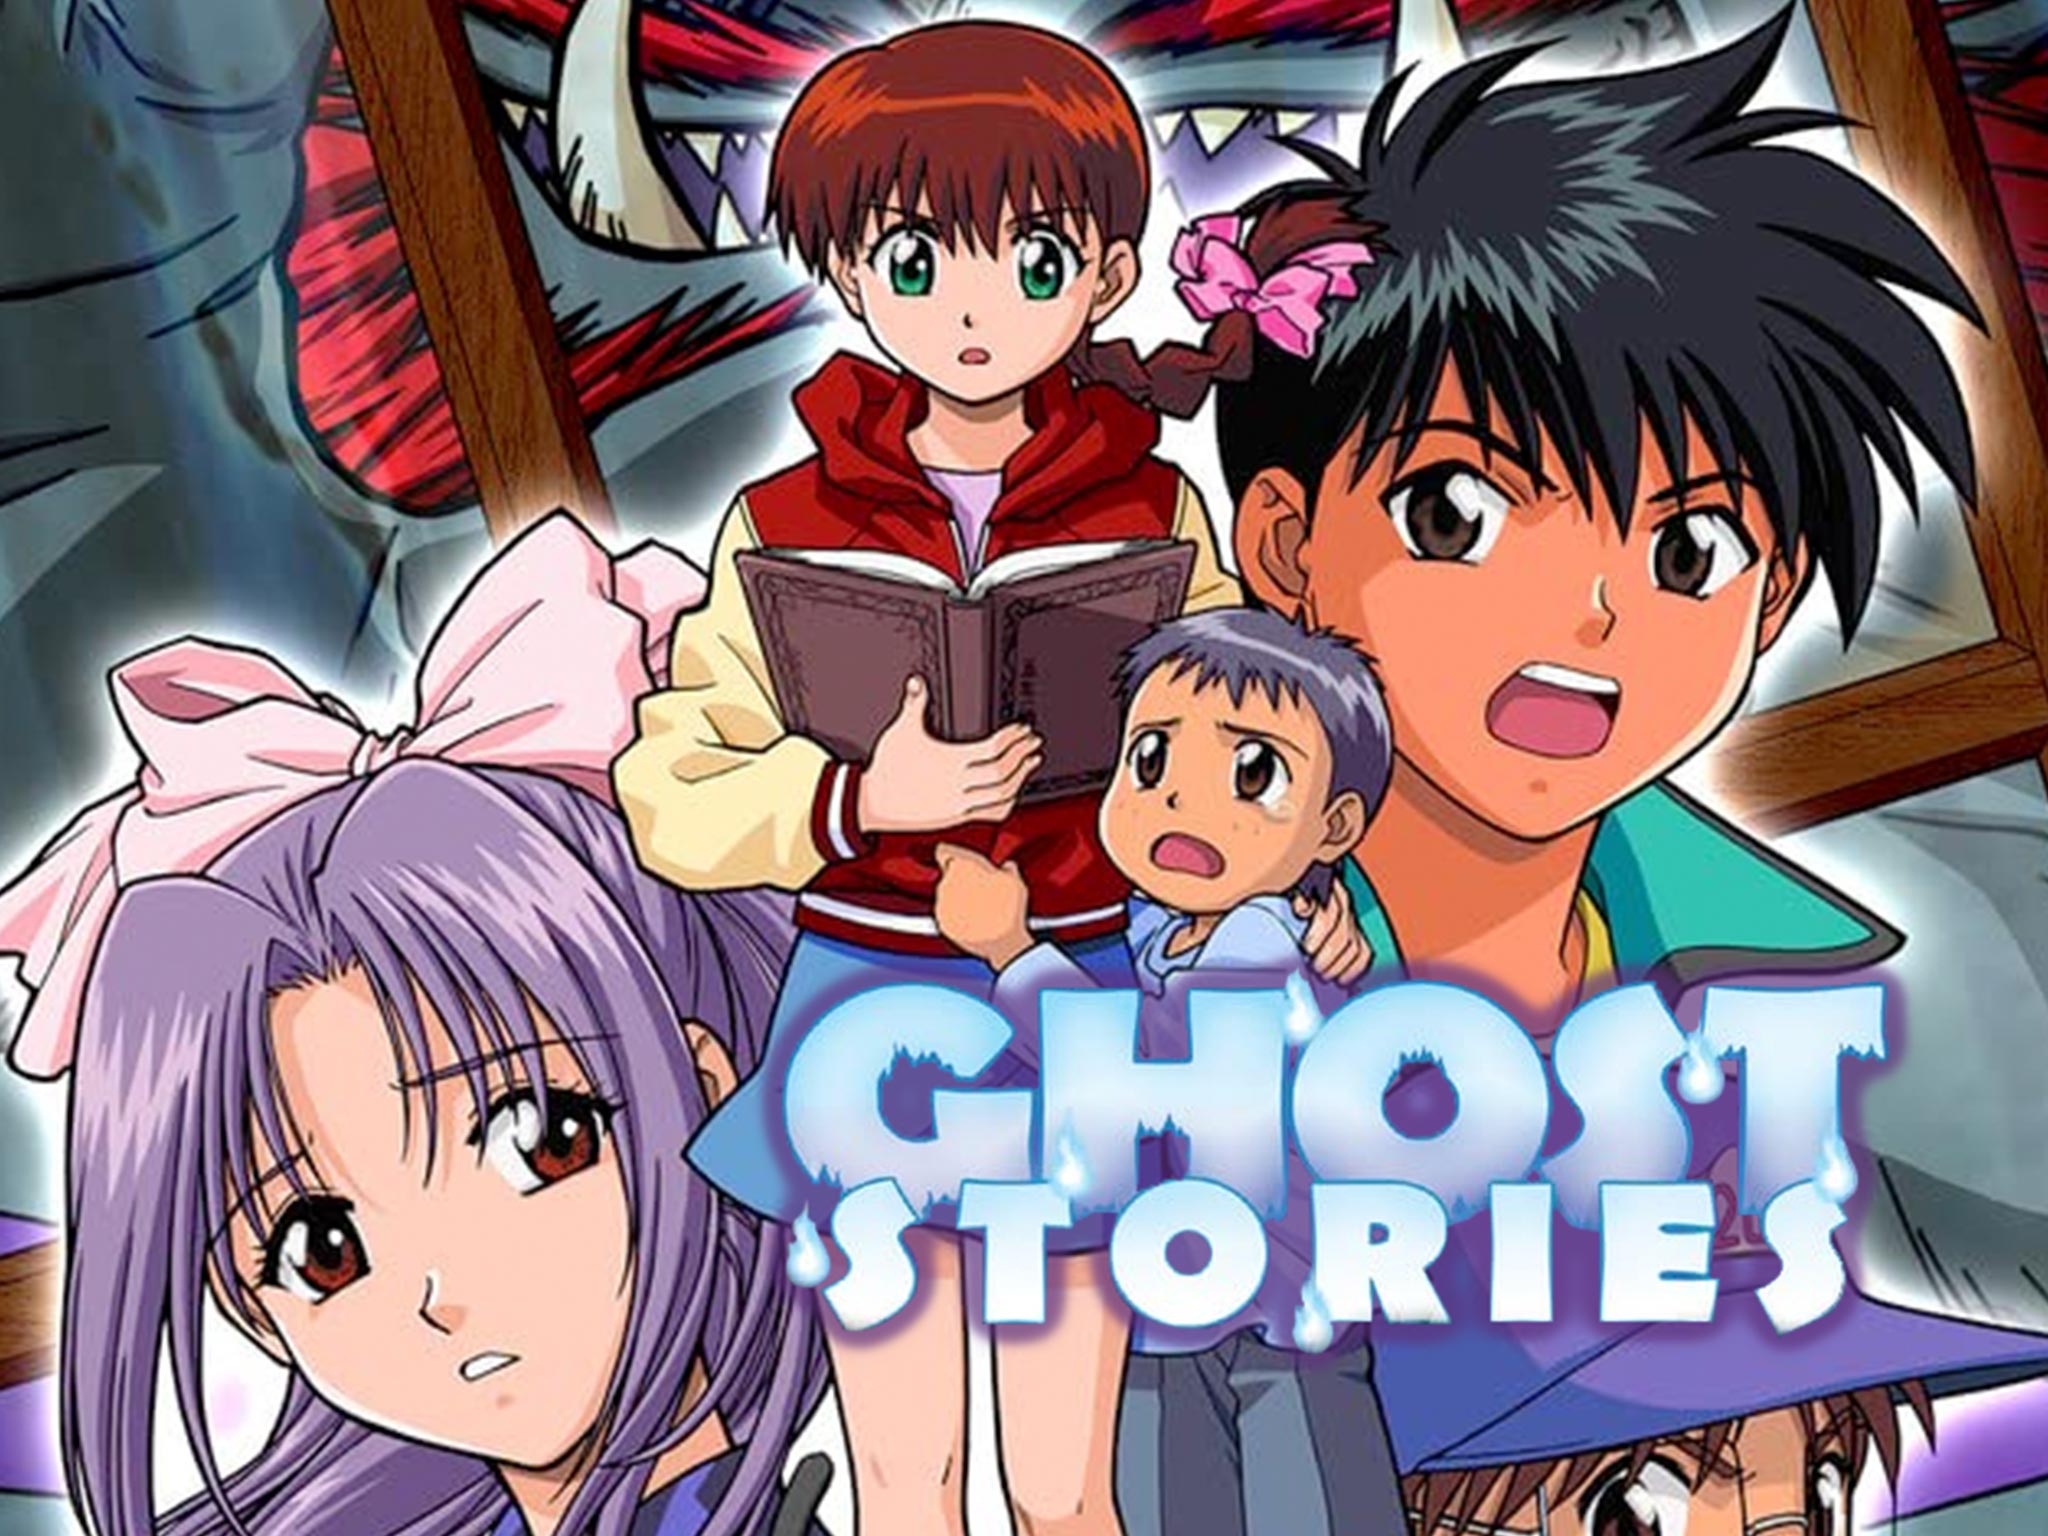 Ghosts At School  Ghost Stories Animax Dub  Animax  Free Download  Borrow and Streaming  Internet Archive